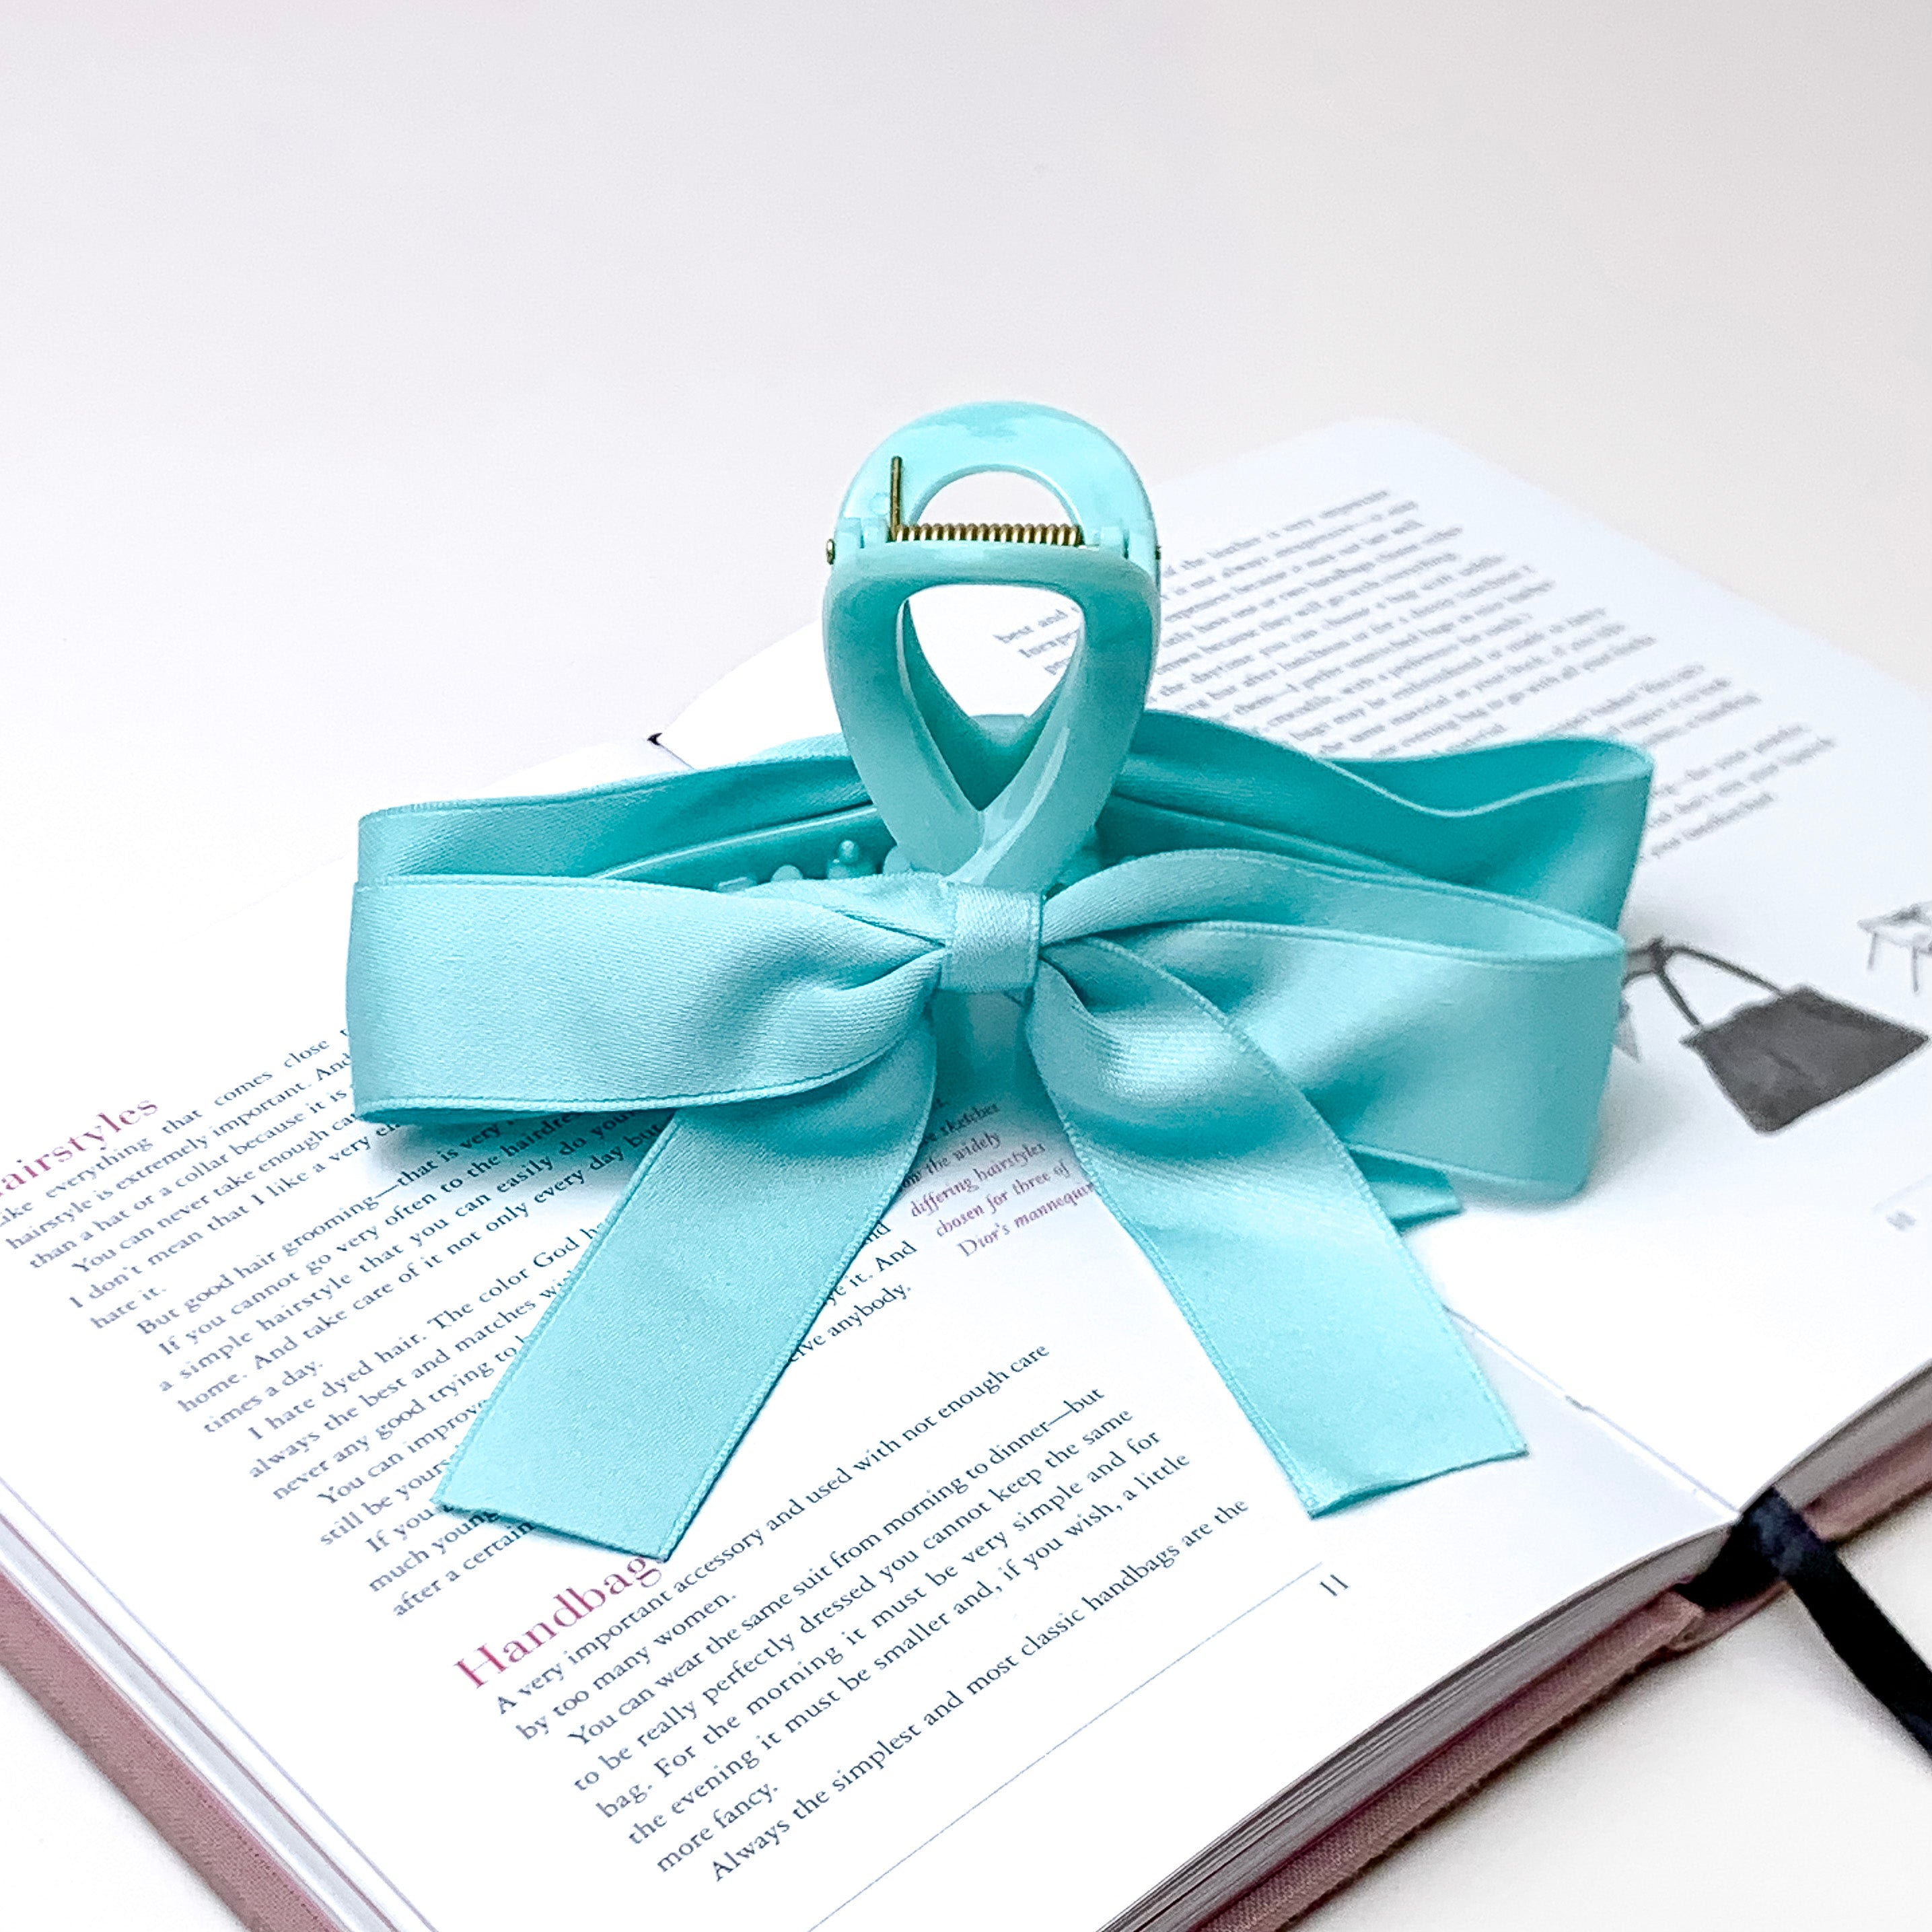 Ribbon Romance Loop Banana Hair Clip in Mint Blue - Giddy Up Glamour Boutique